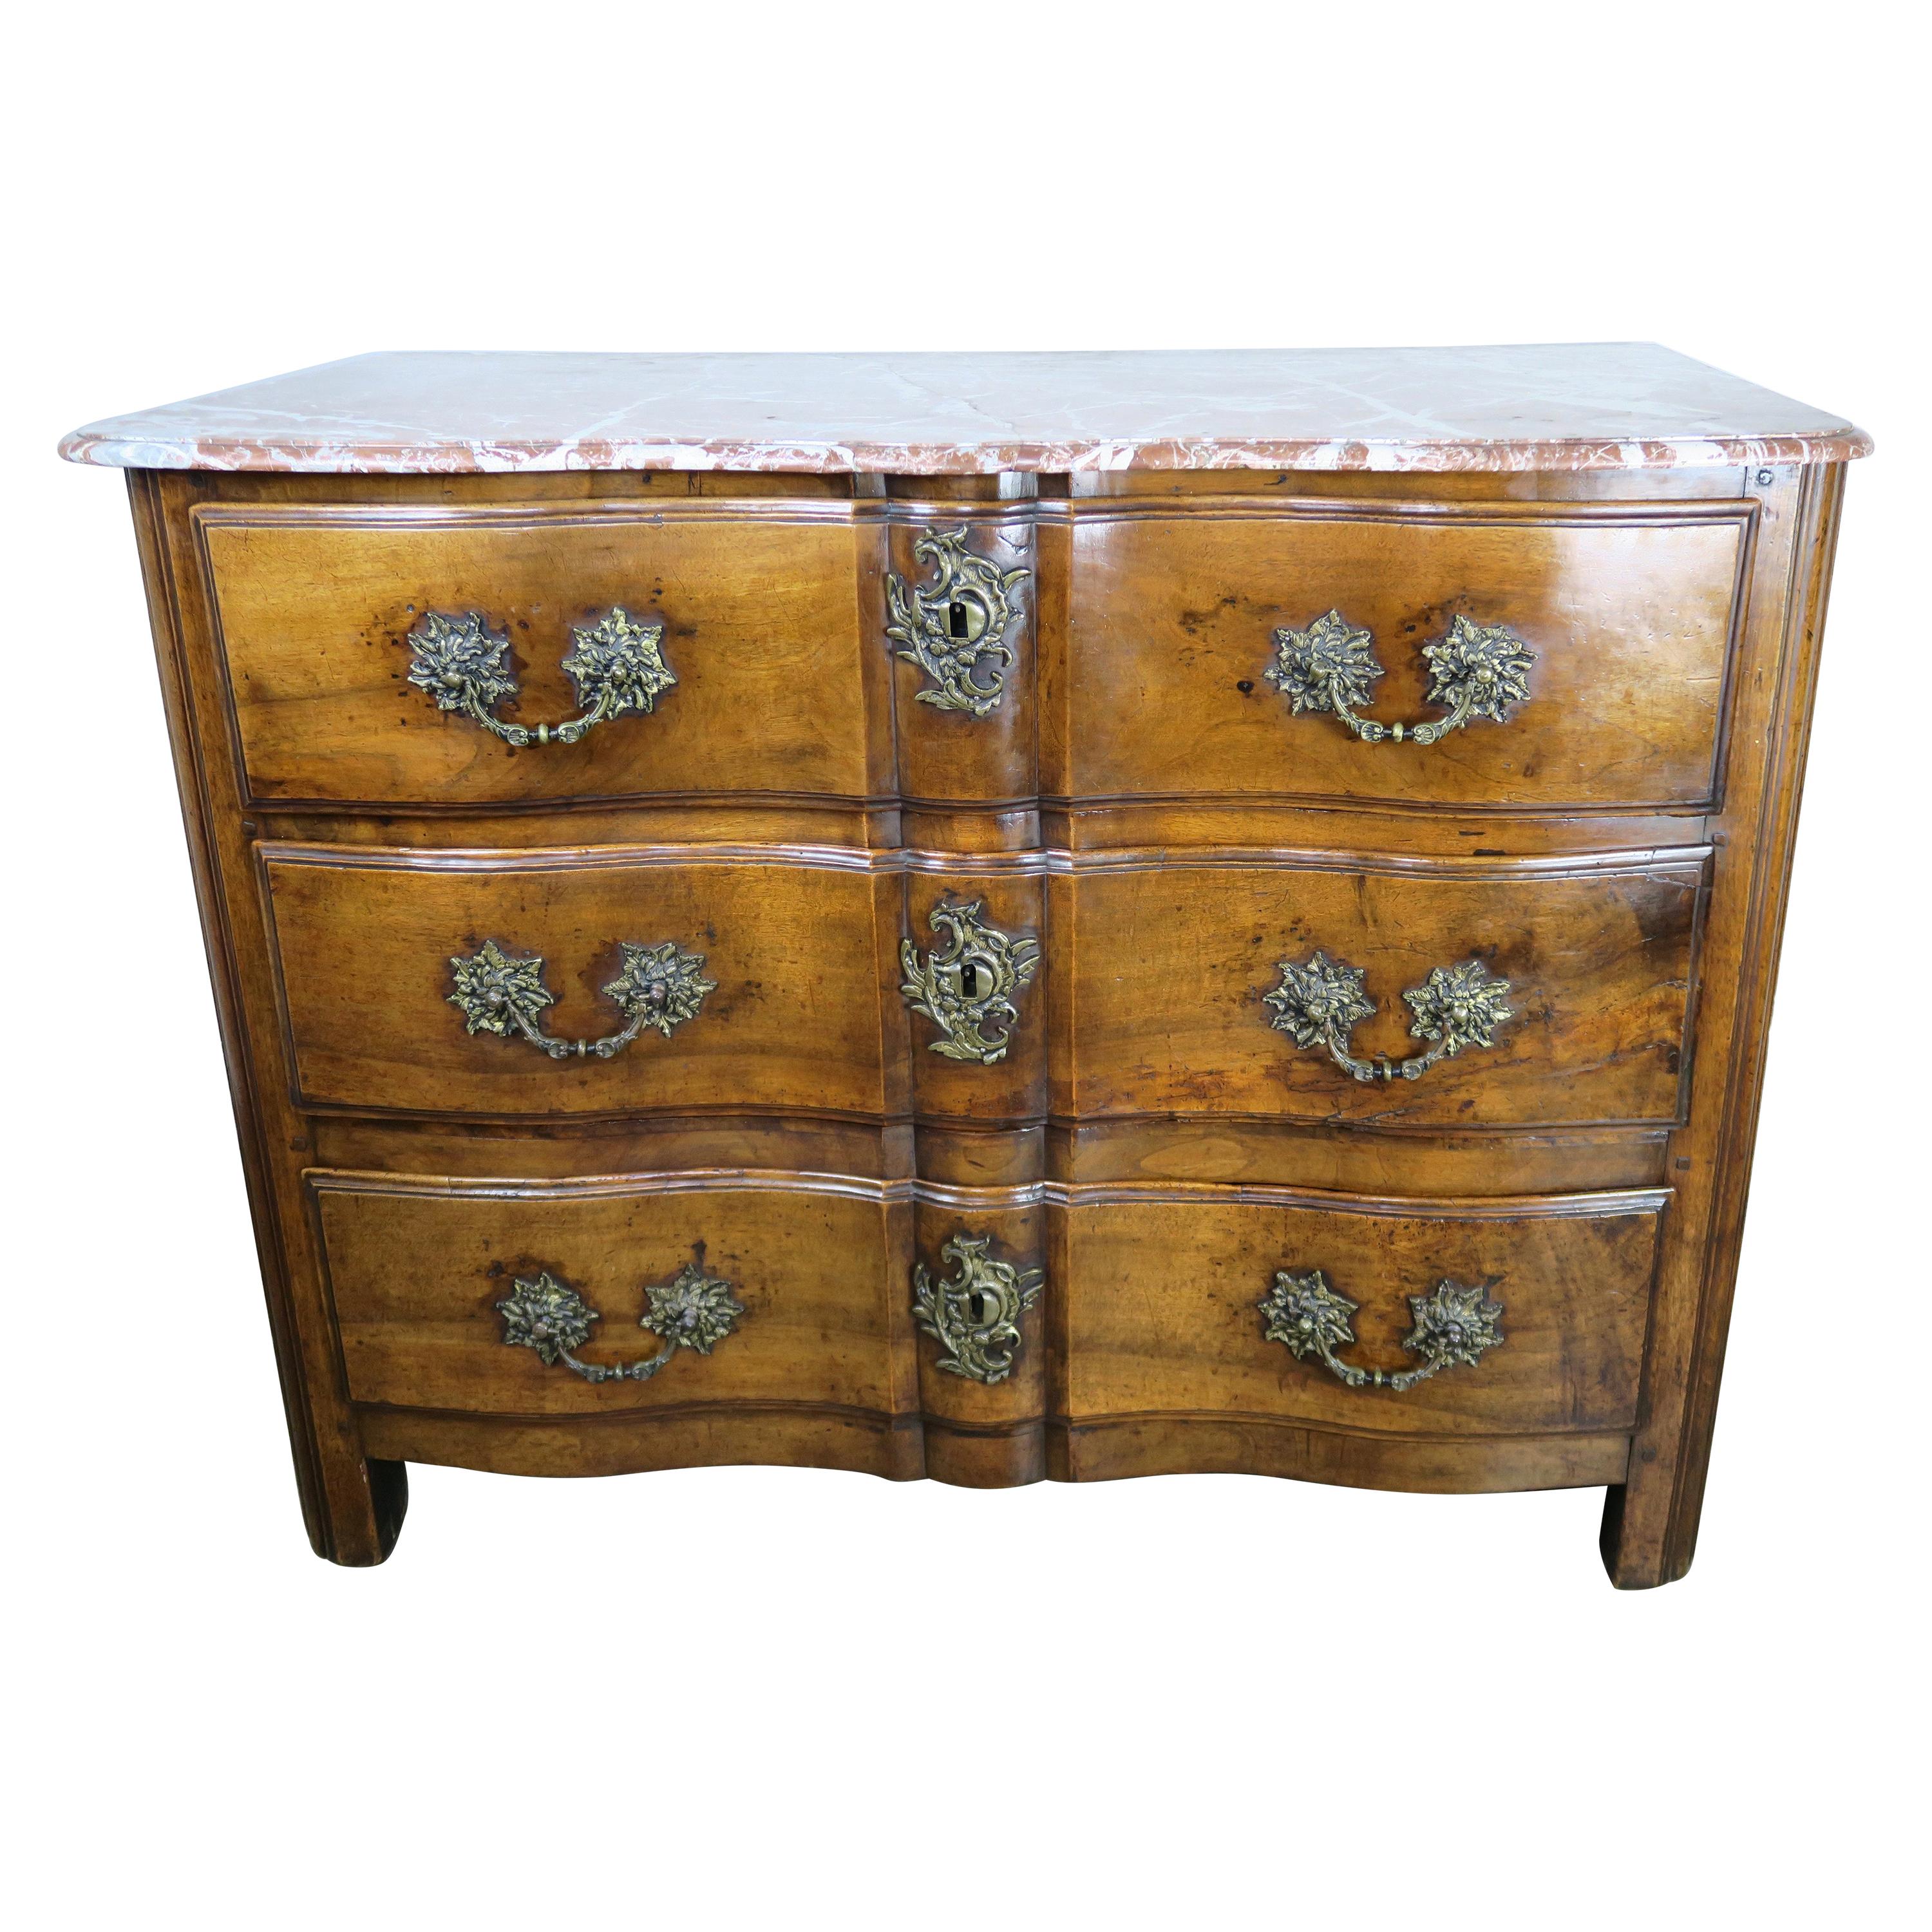 Early 19th Century French Louis XV Style Commode with Bronze Hardware